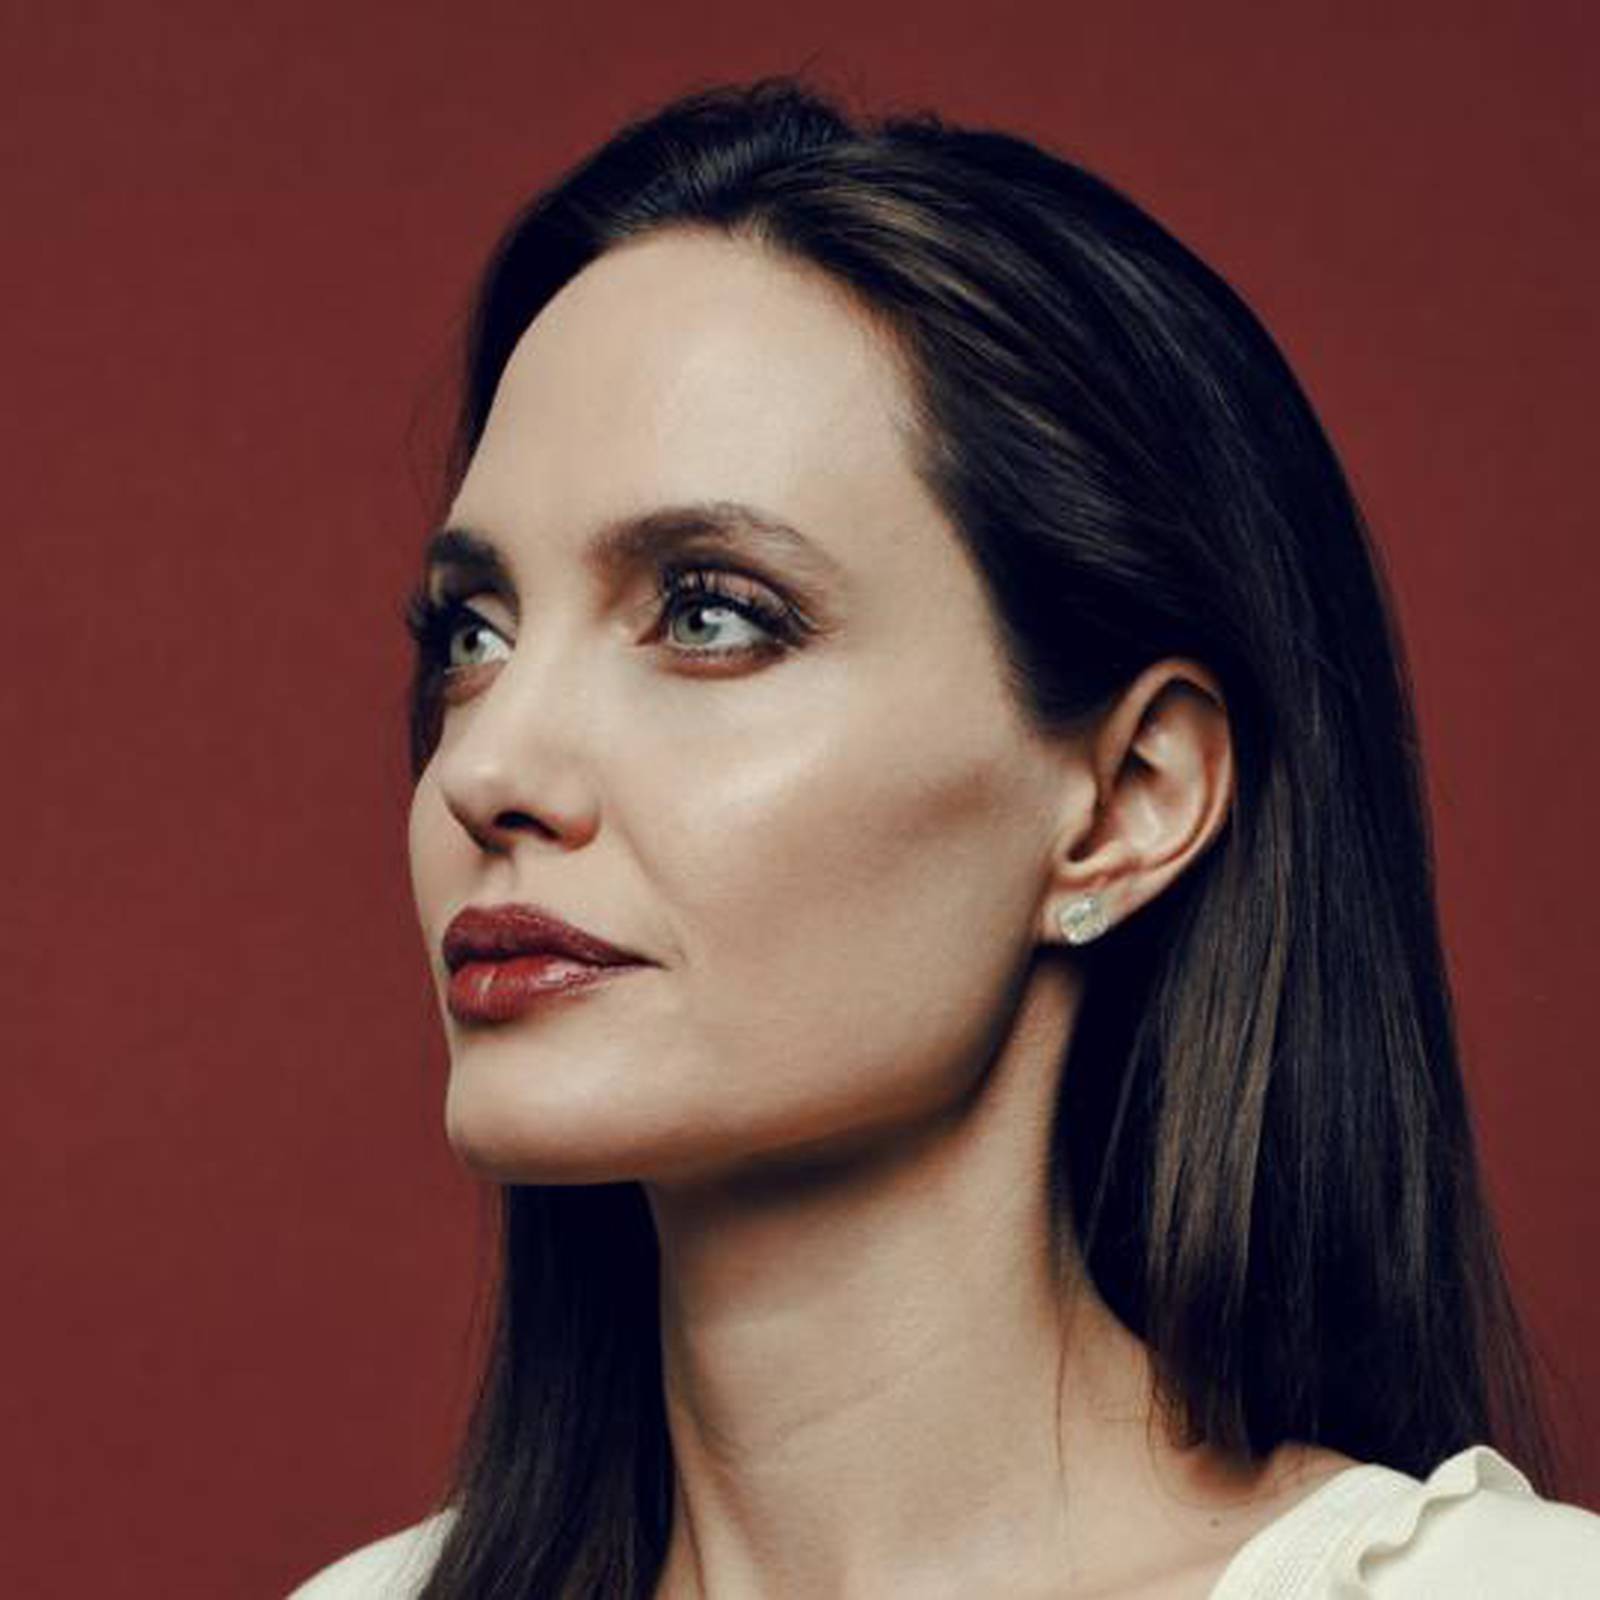 the Morning Magazine: CAMPAIGN. Louis Vuitton - Angelina Jolie